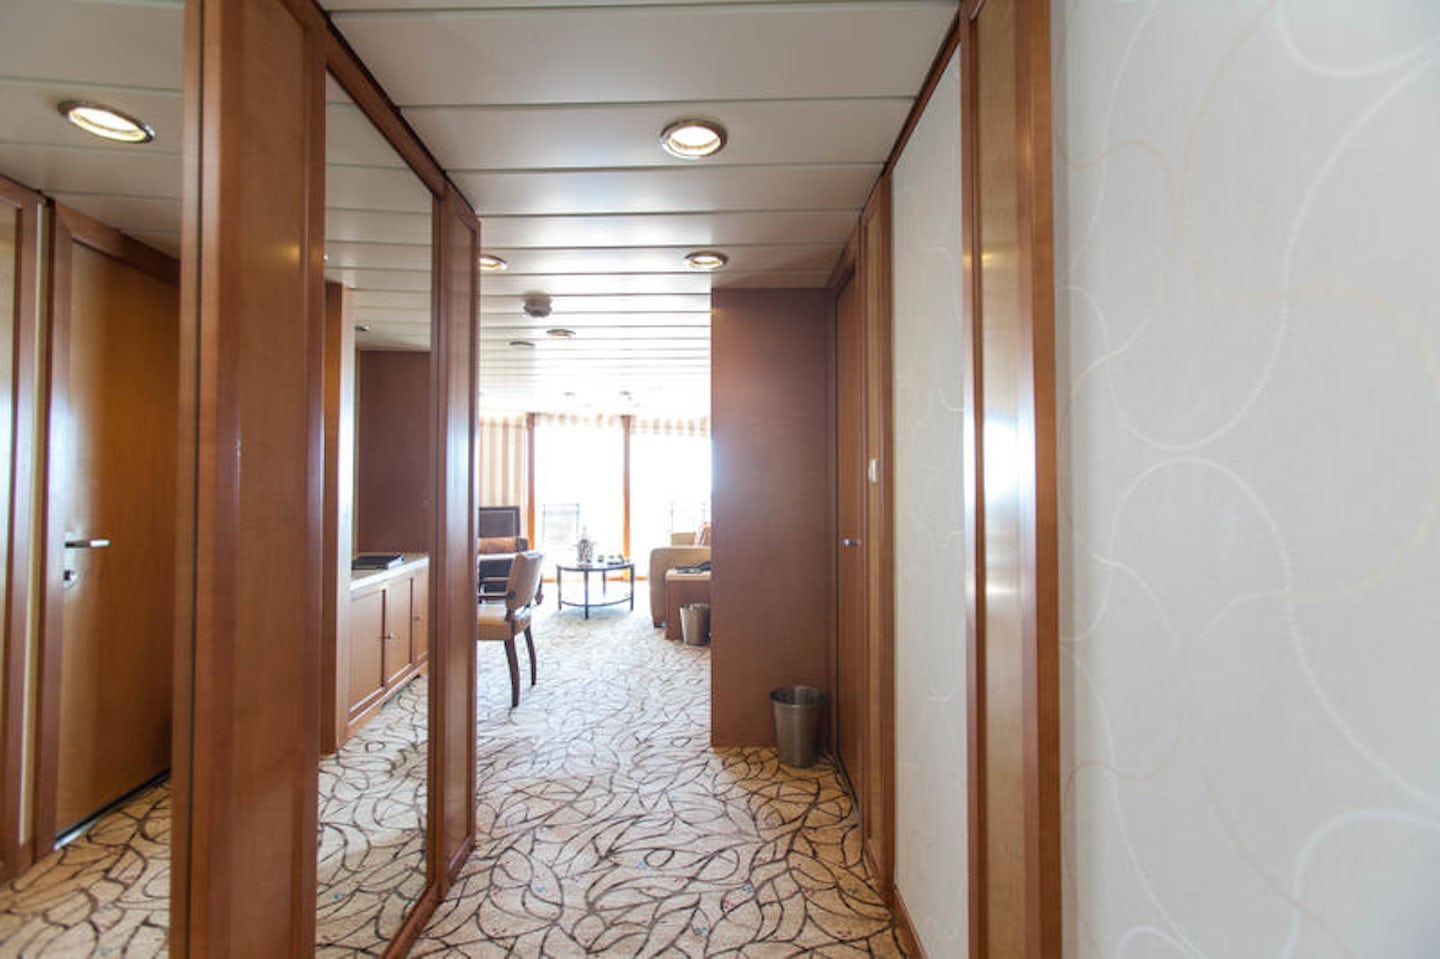 The Celebrity Suite on Celebrity Constellation